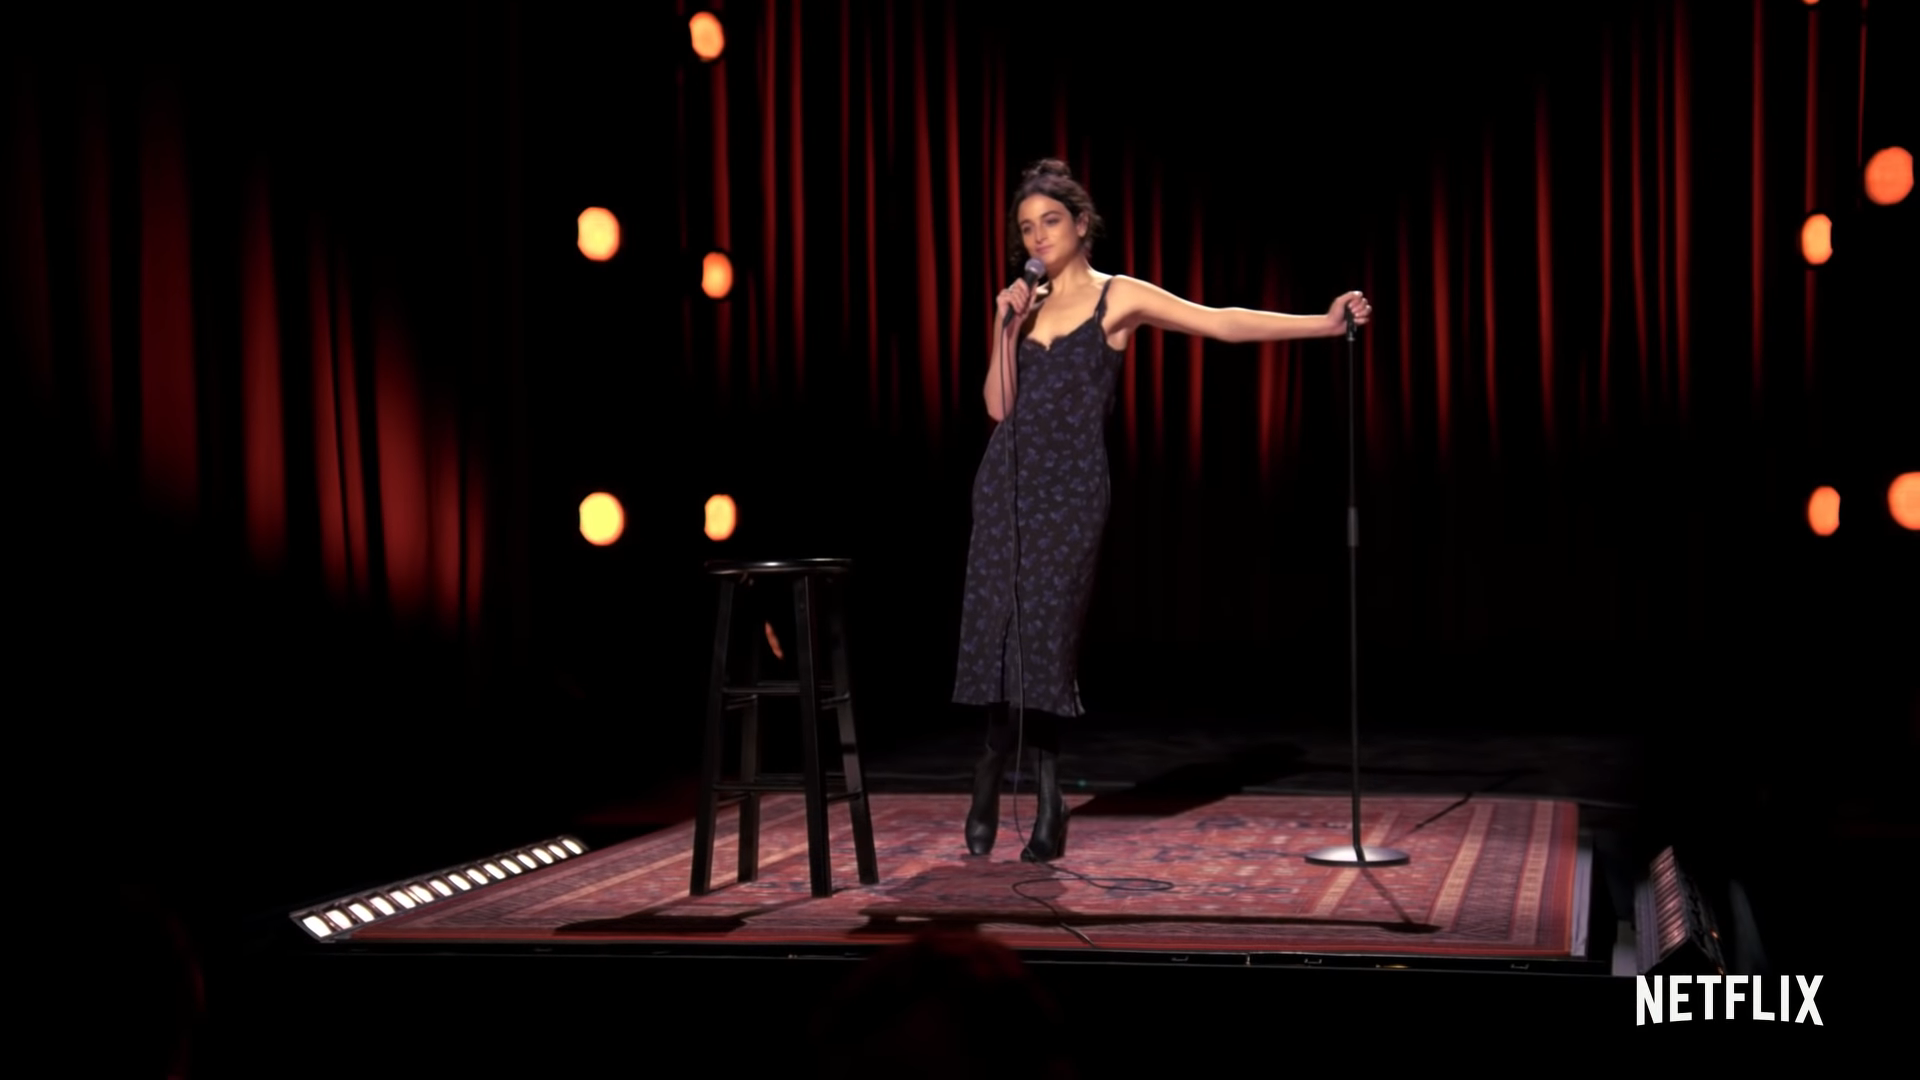 Jenny Slate Stage Fright Netflix Trailer, Netflix Standup Comedy Specials, Netflix Comedy Specials, Coming to Netflix in October 2019